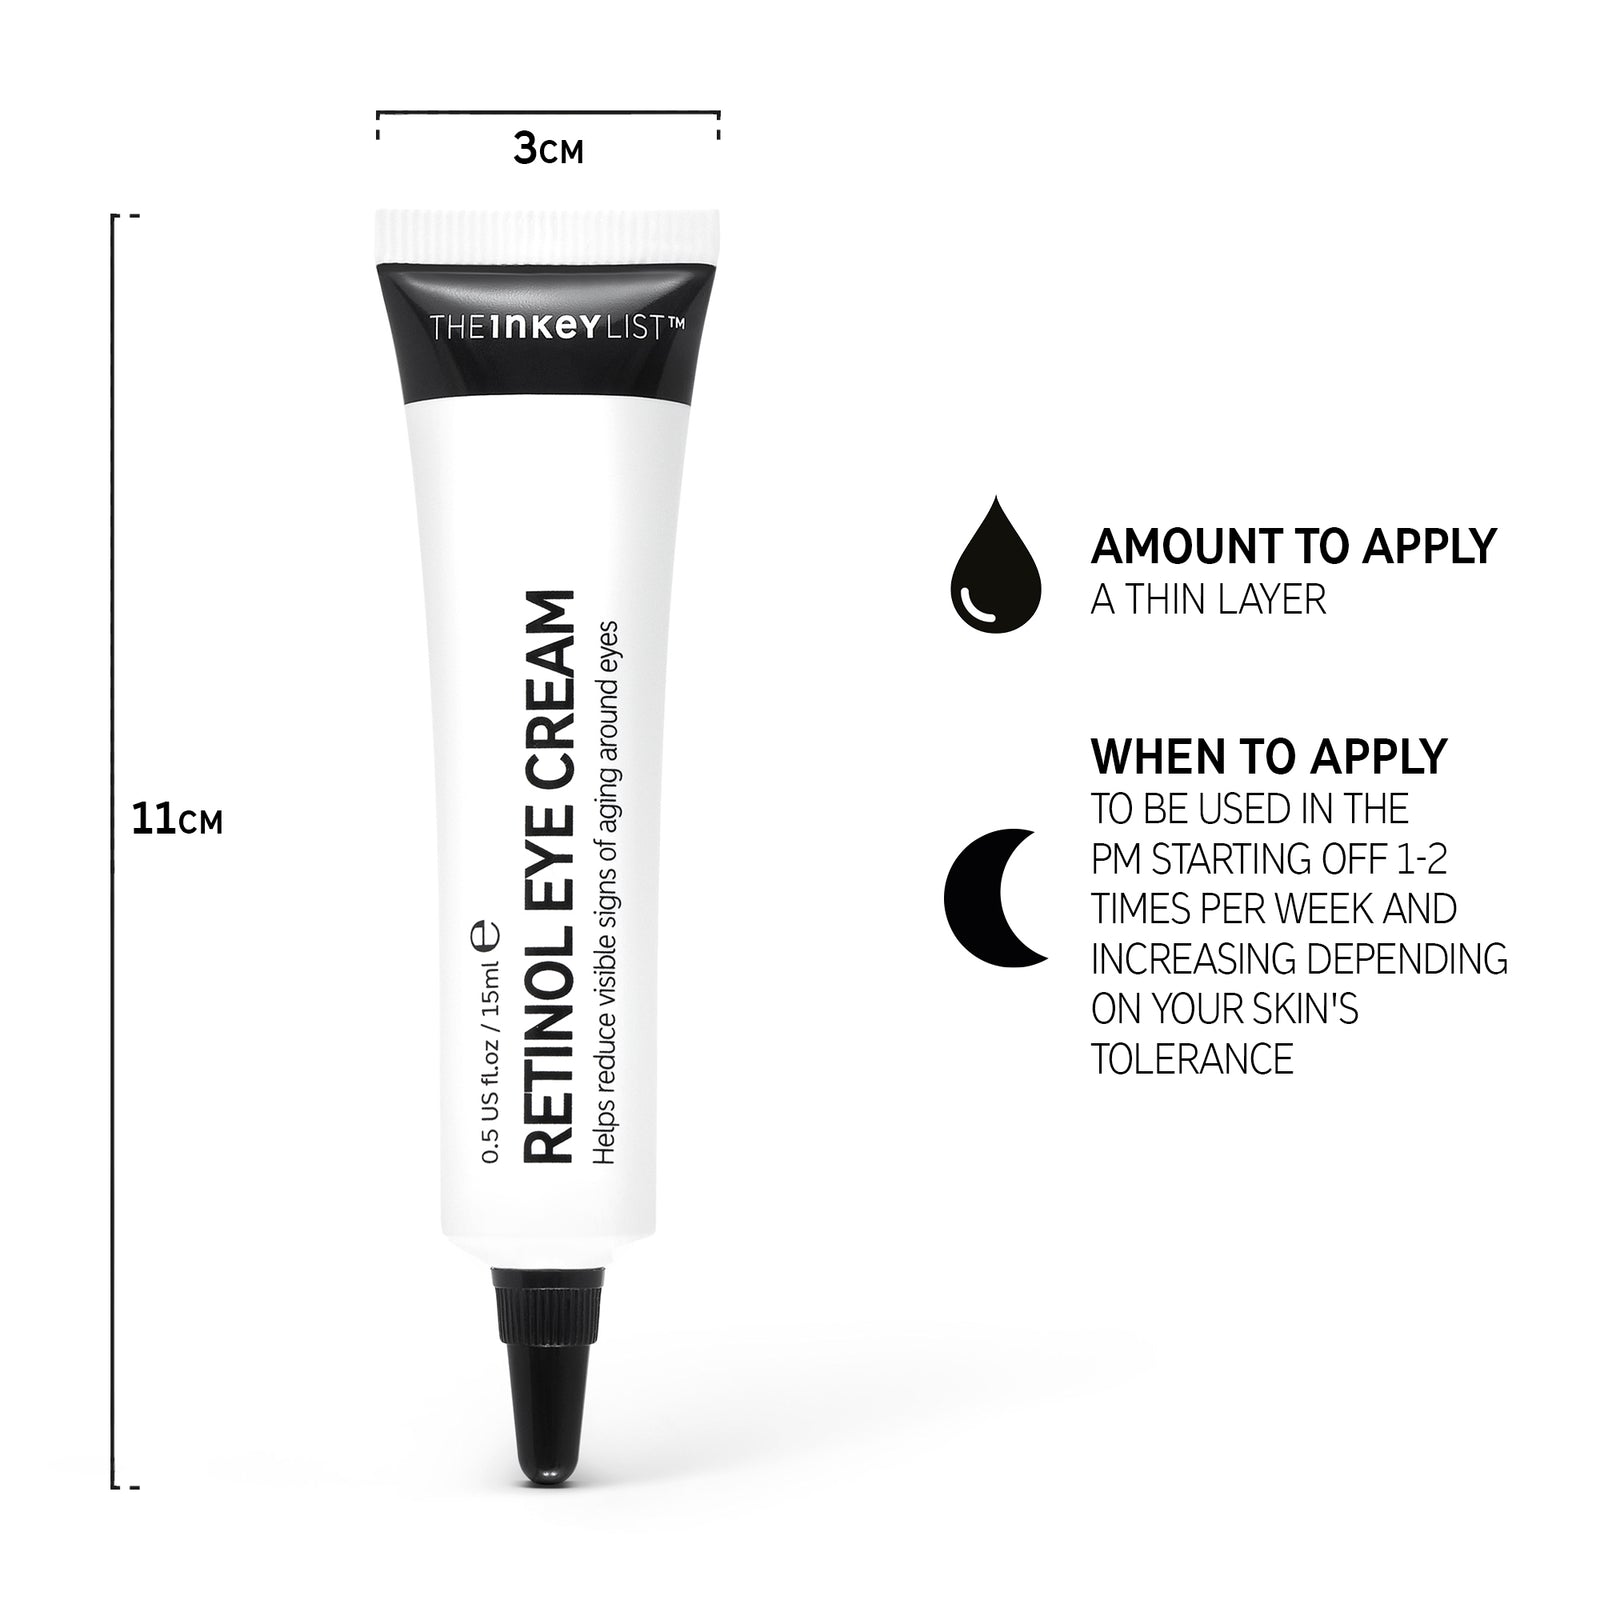 Retinol Eye Cream annotated with how and when to use it with text that reads 'Amount to apply (a thin layer)' and 'When to apply (PM)' 